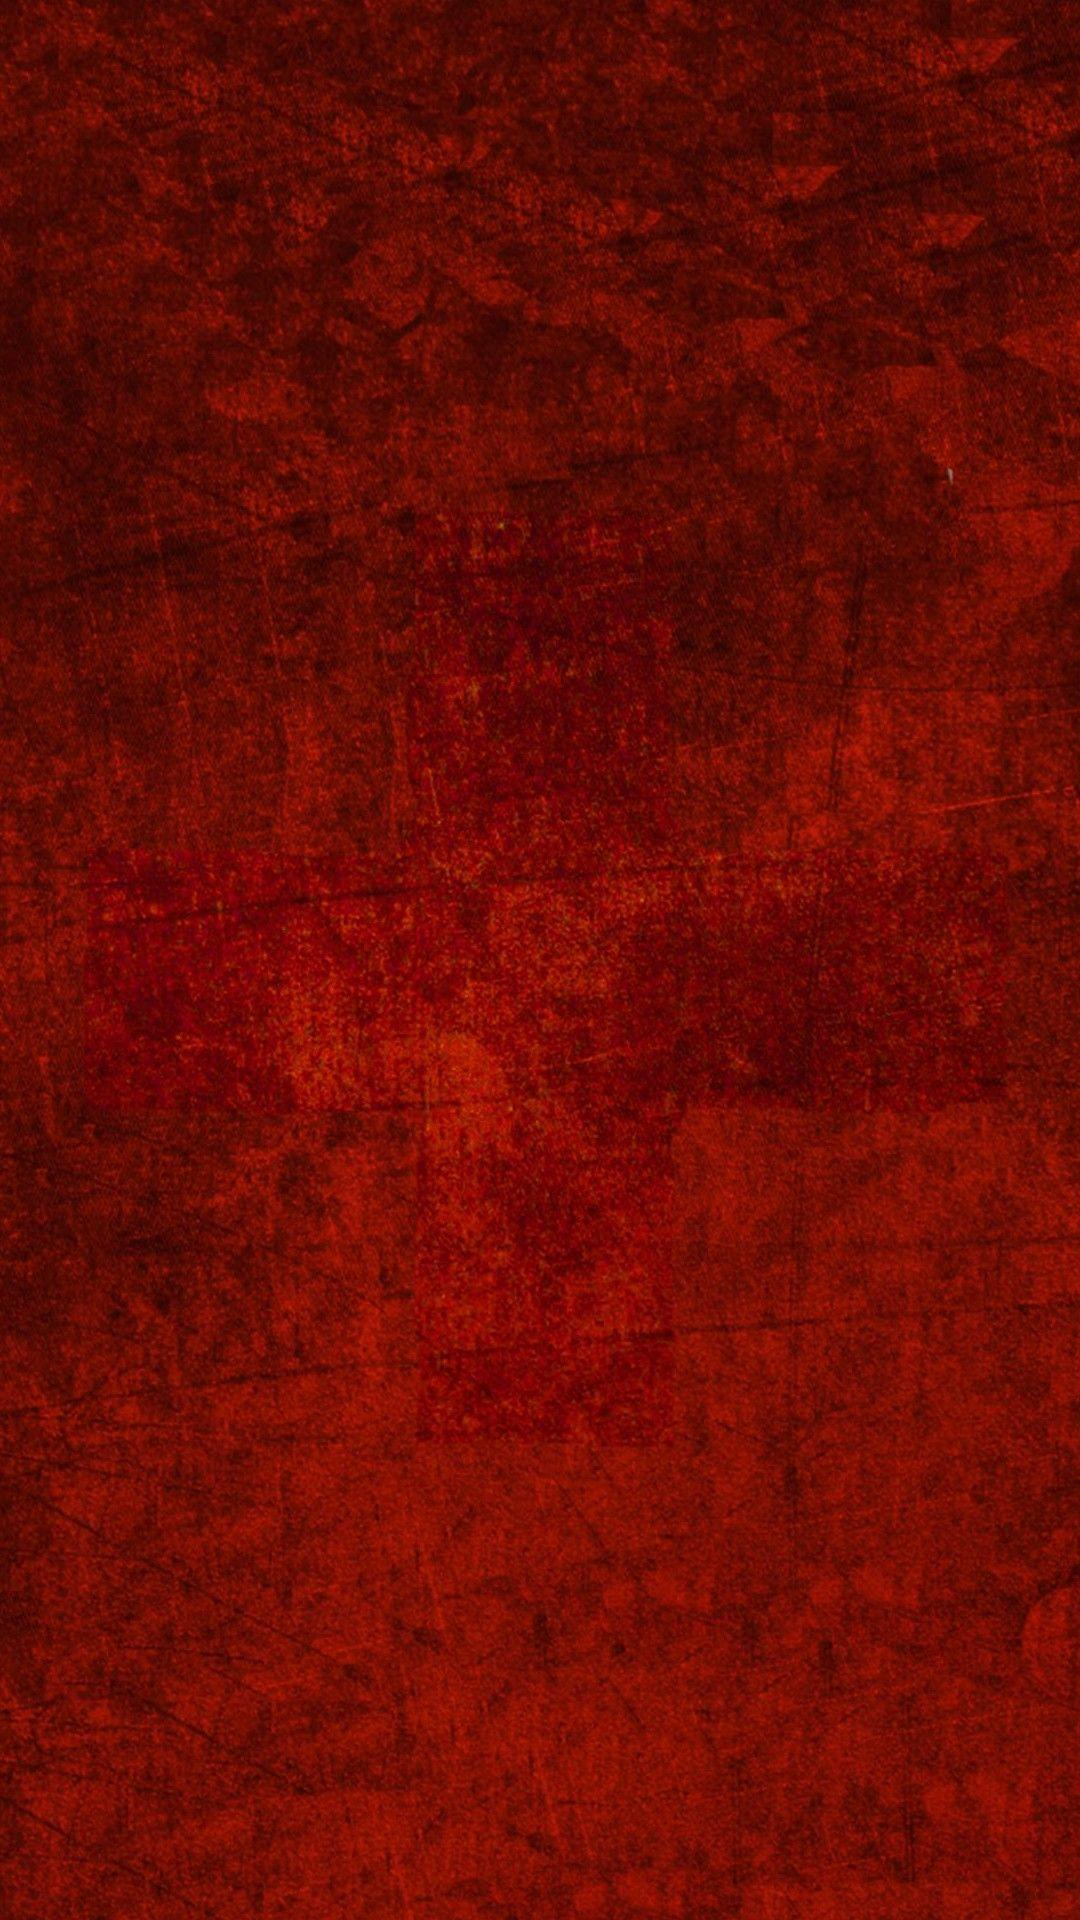 1080x1920 Red Texture Wallpapers